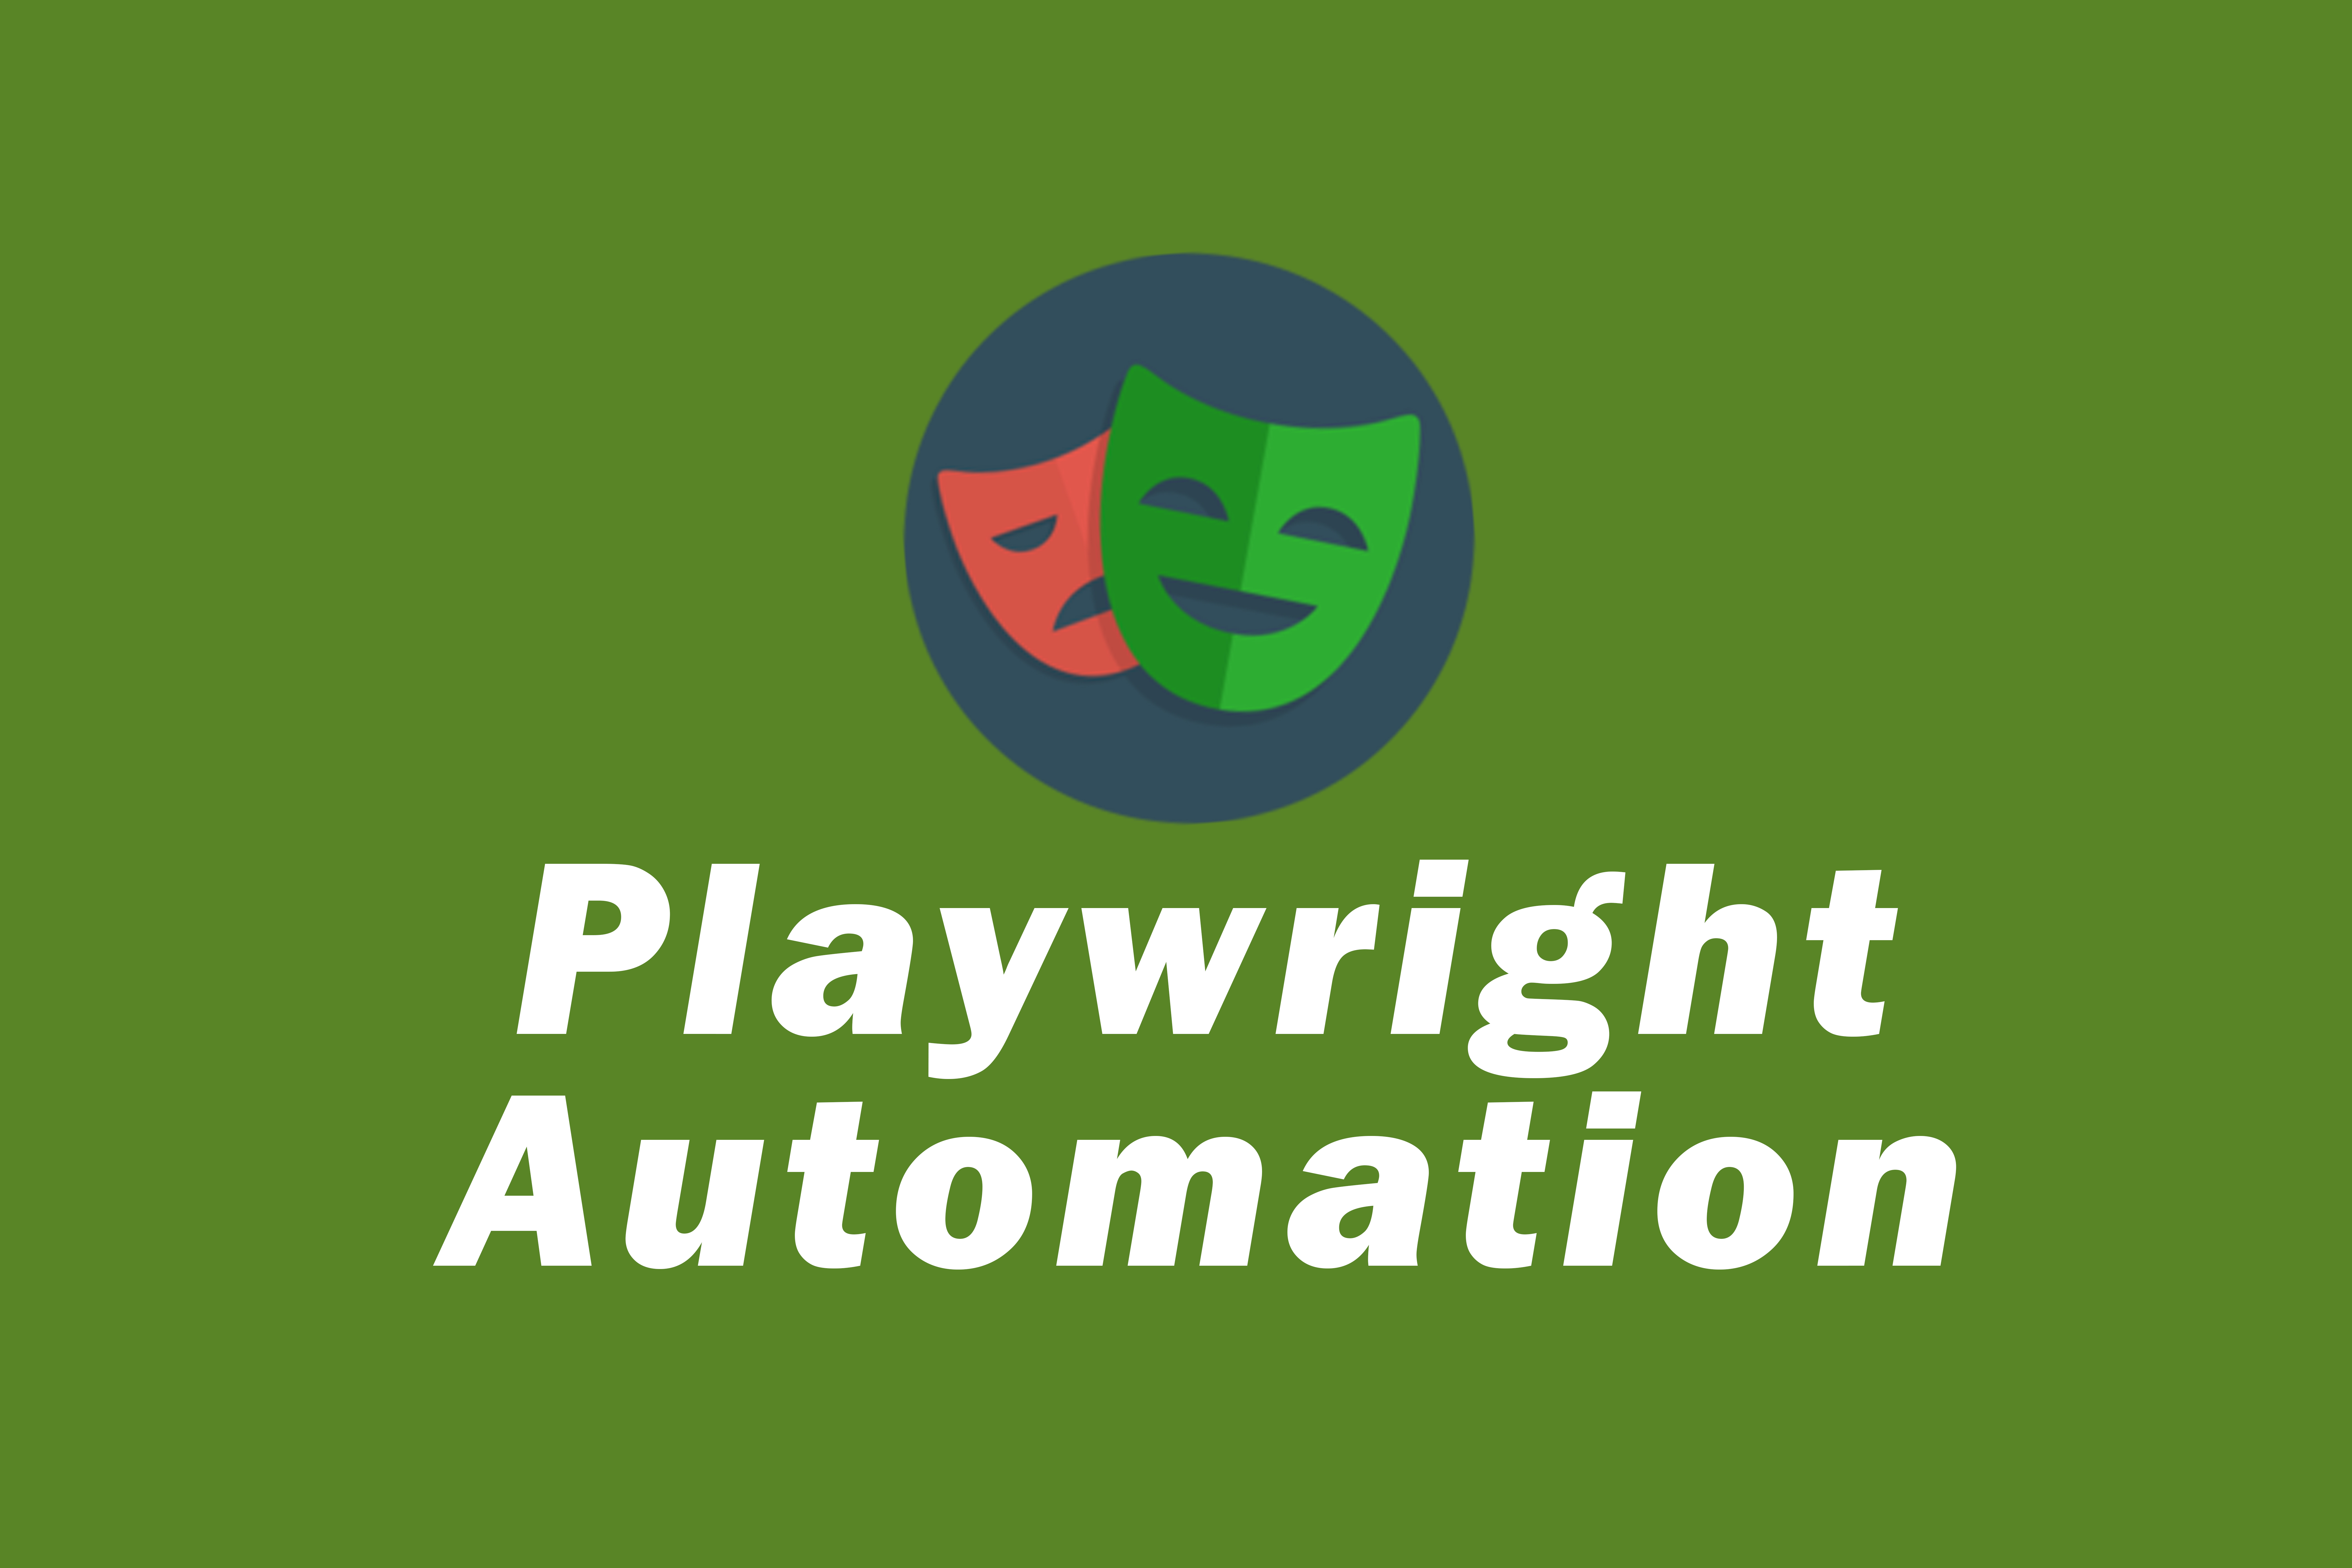 Playwright Automation